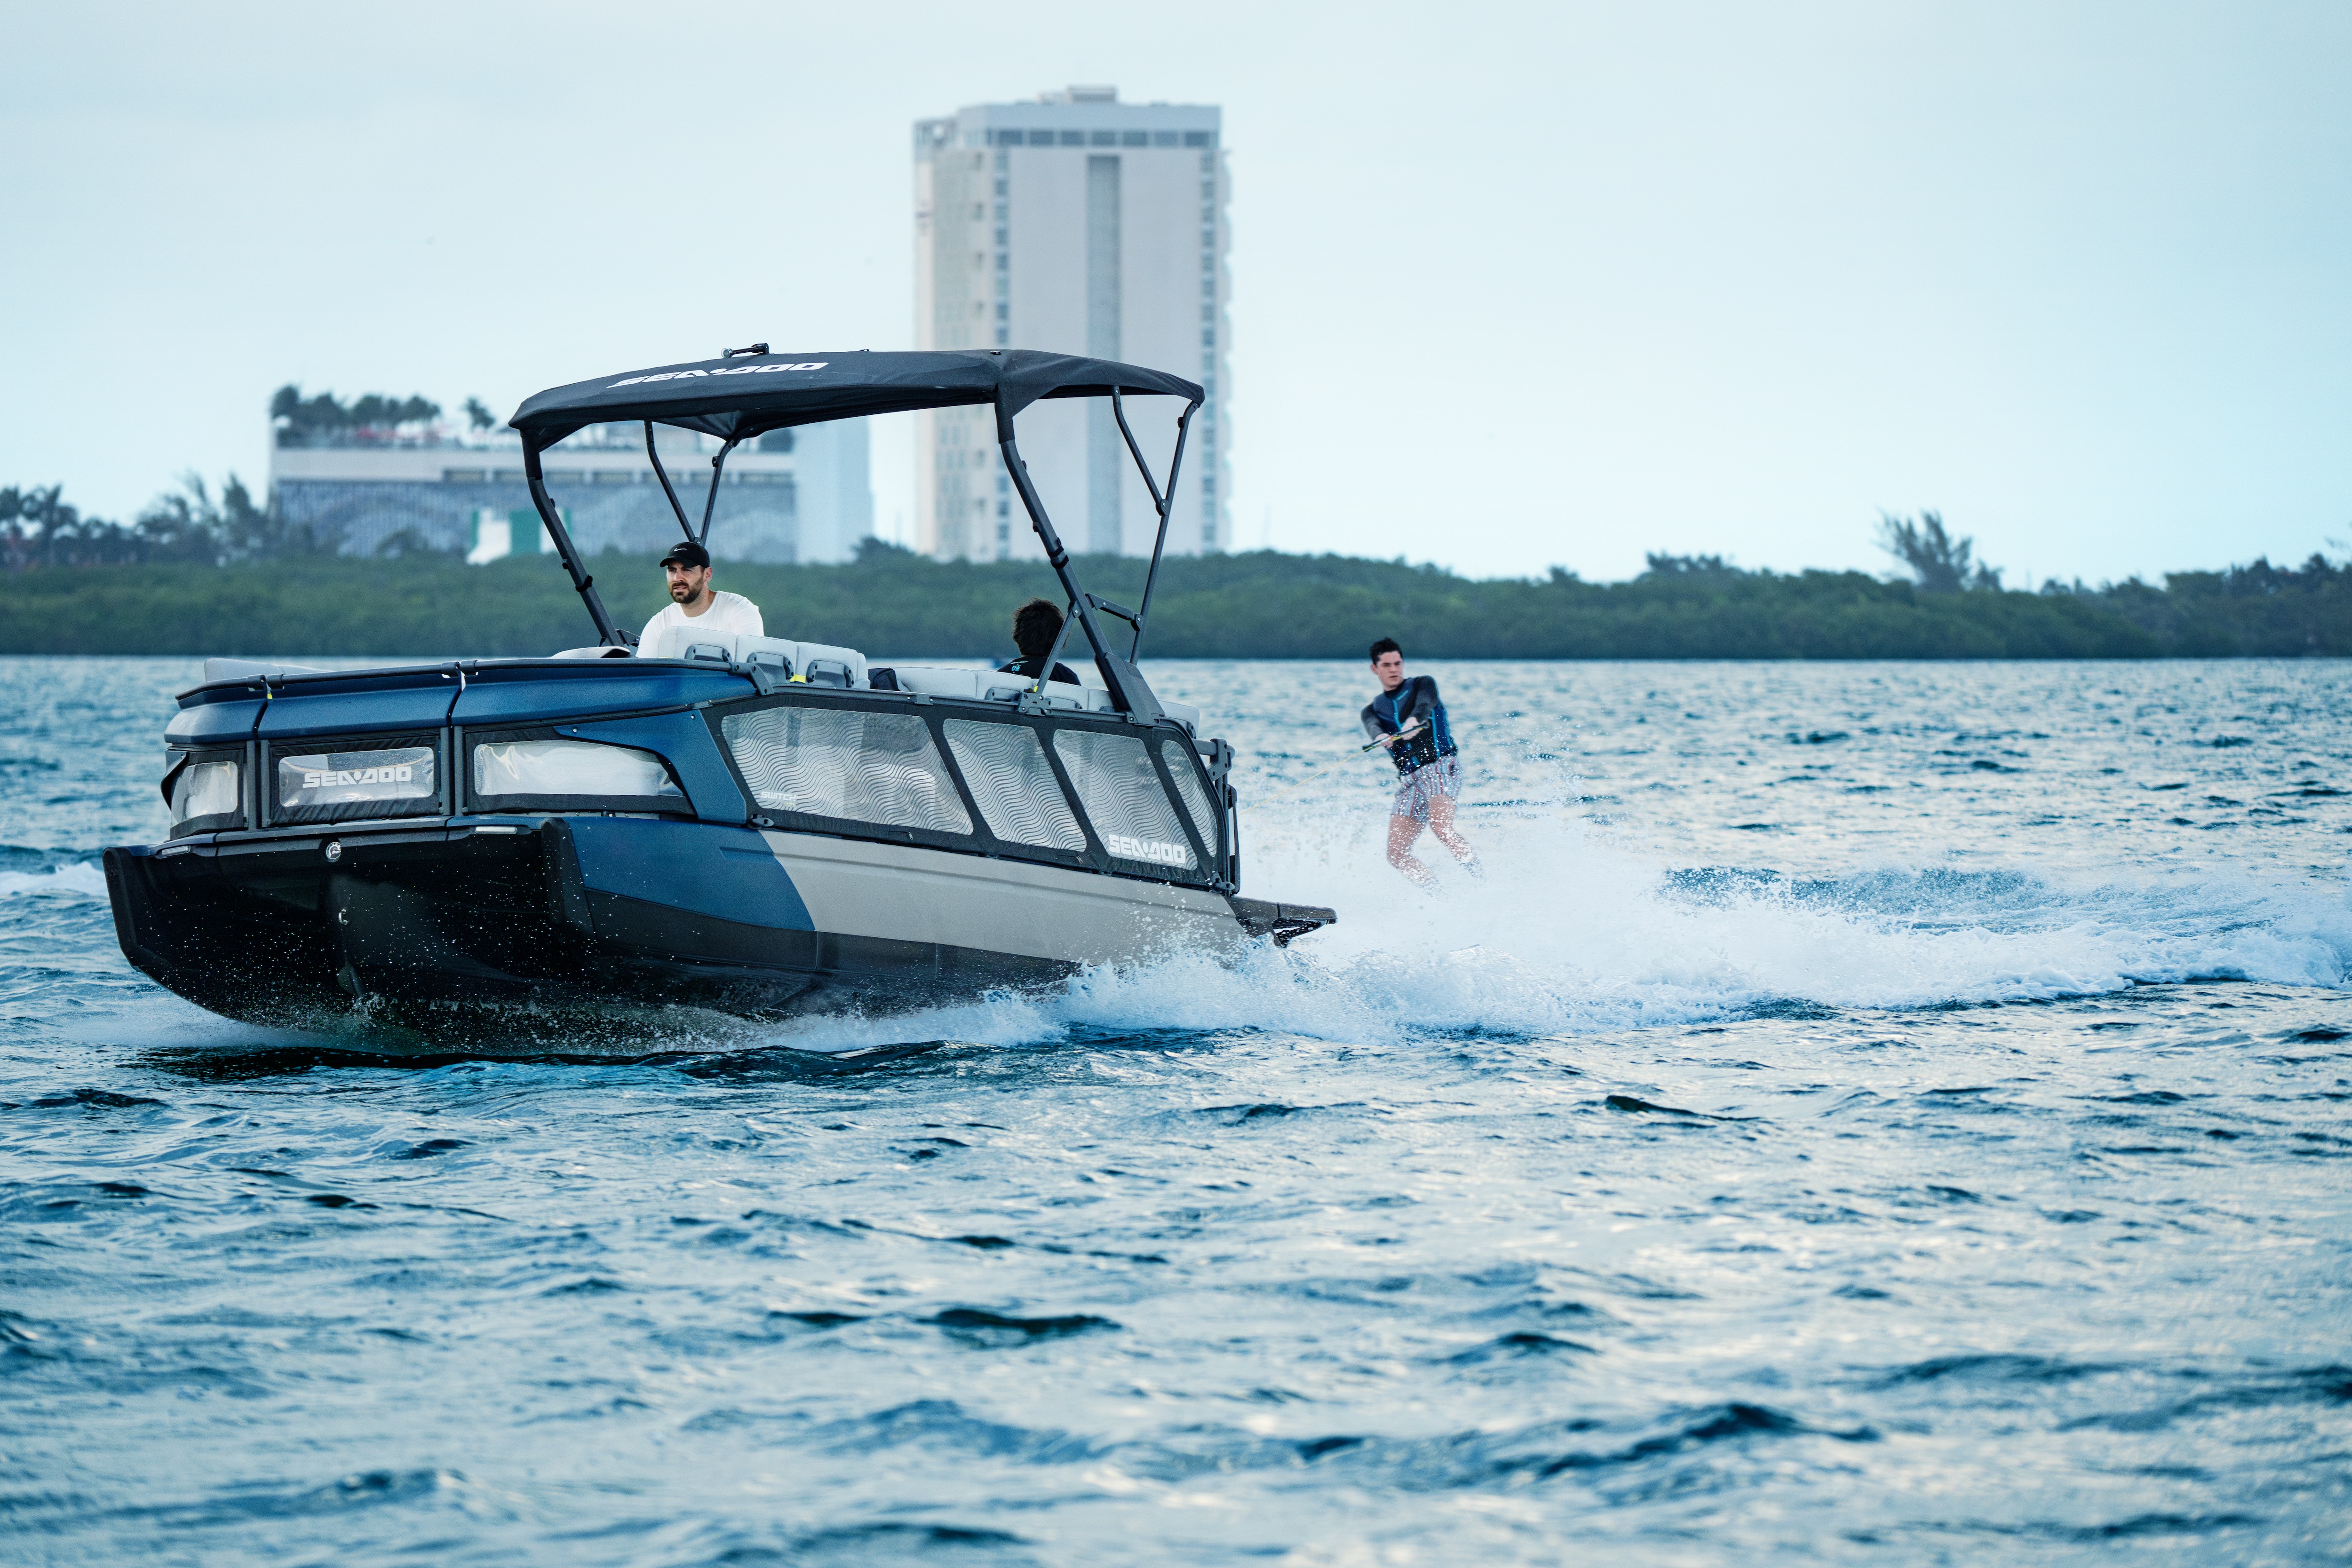 Sea-Doo Switch Limited pontoon boat pulling a wakeboarder